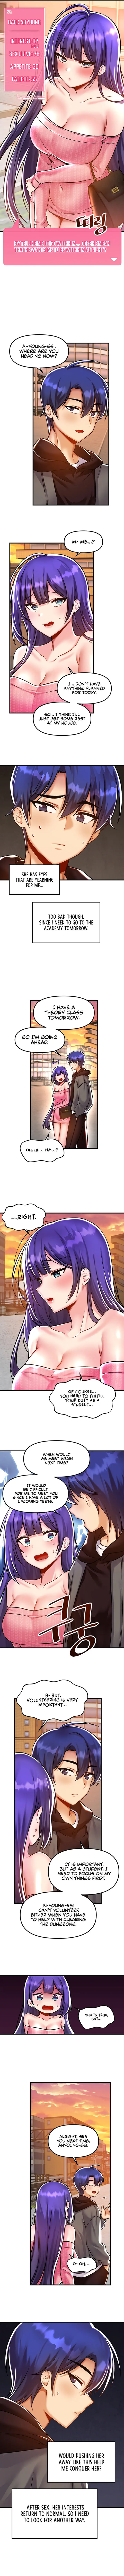 trapped-in-the-academys-eroge-chap-40-3